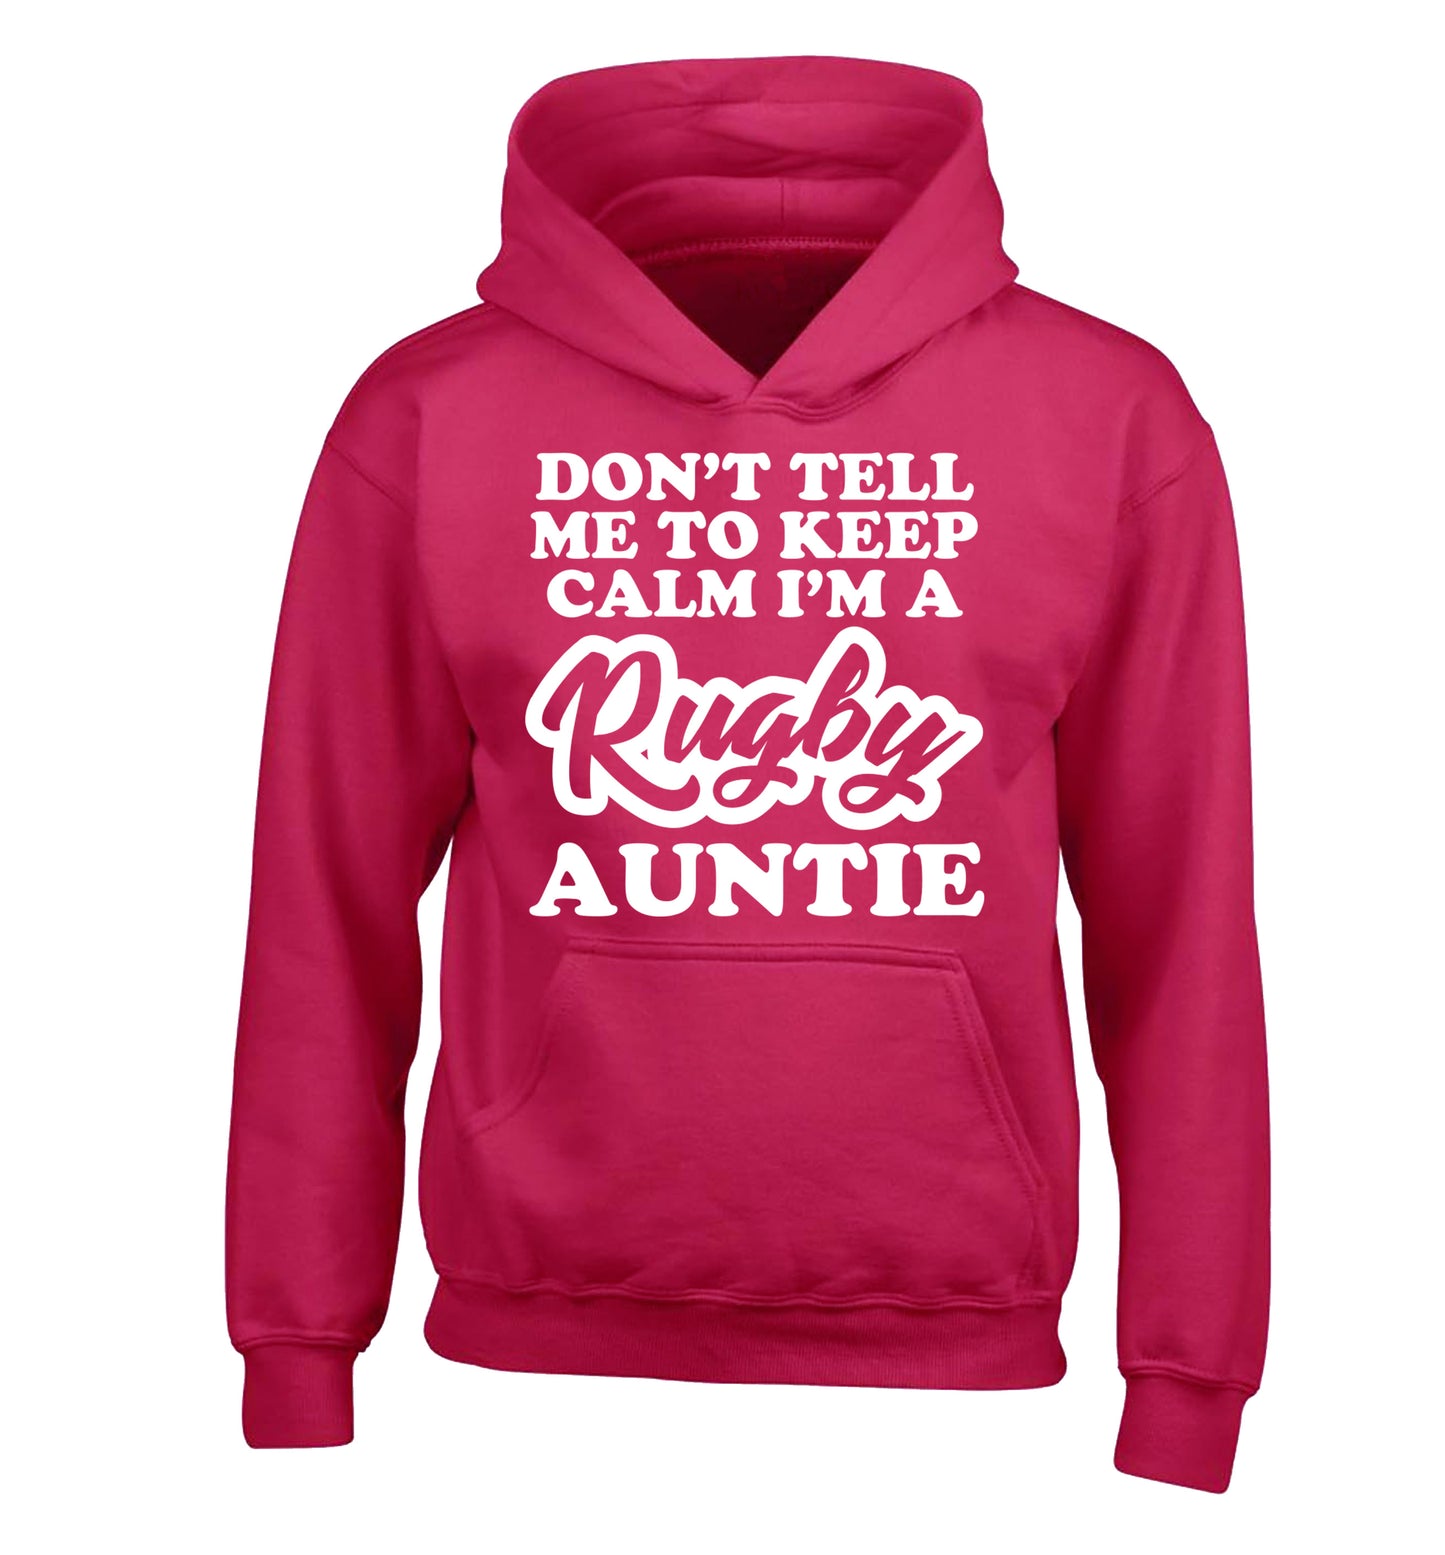 Don't tell me keep calm I'm a rugby auntie children's pink hoodie 12-13 Years